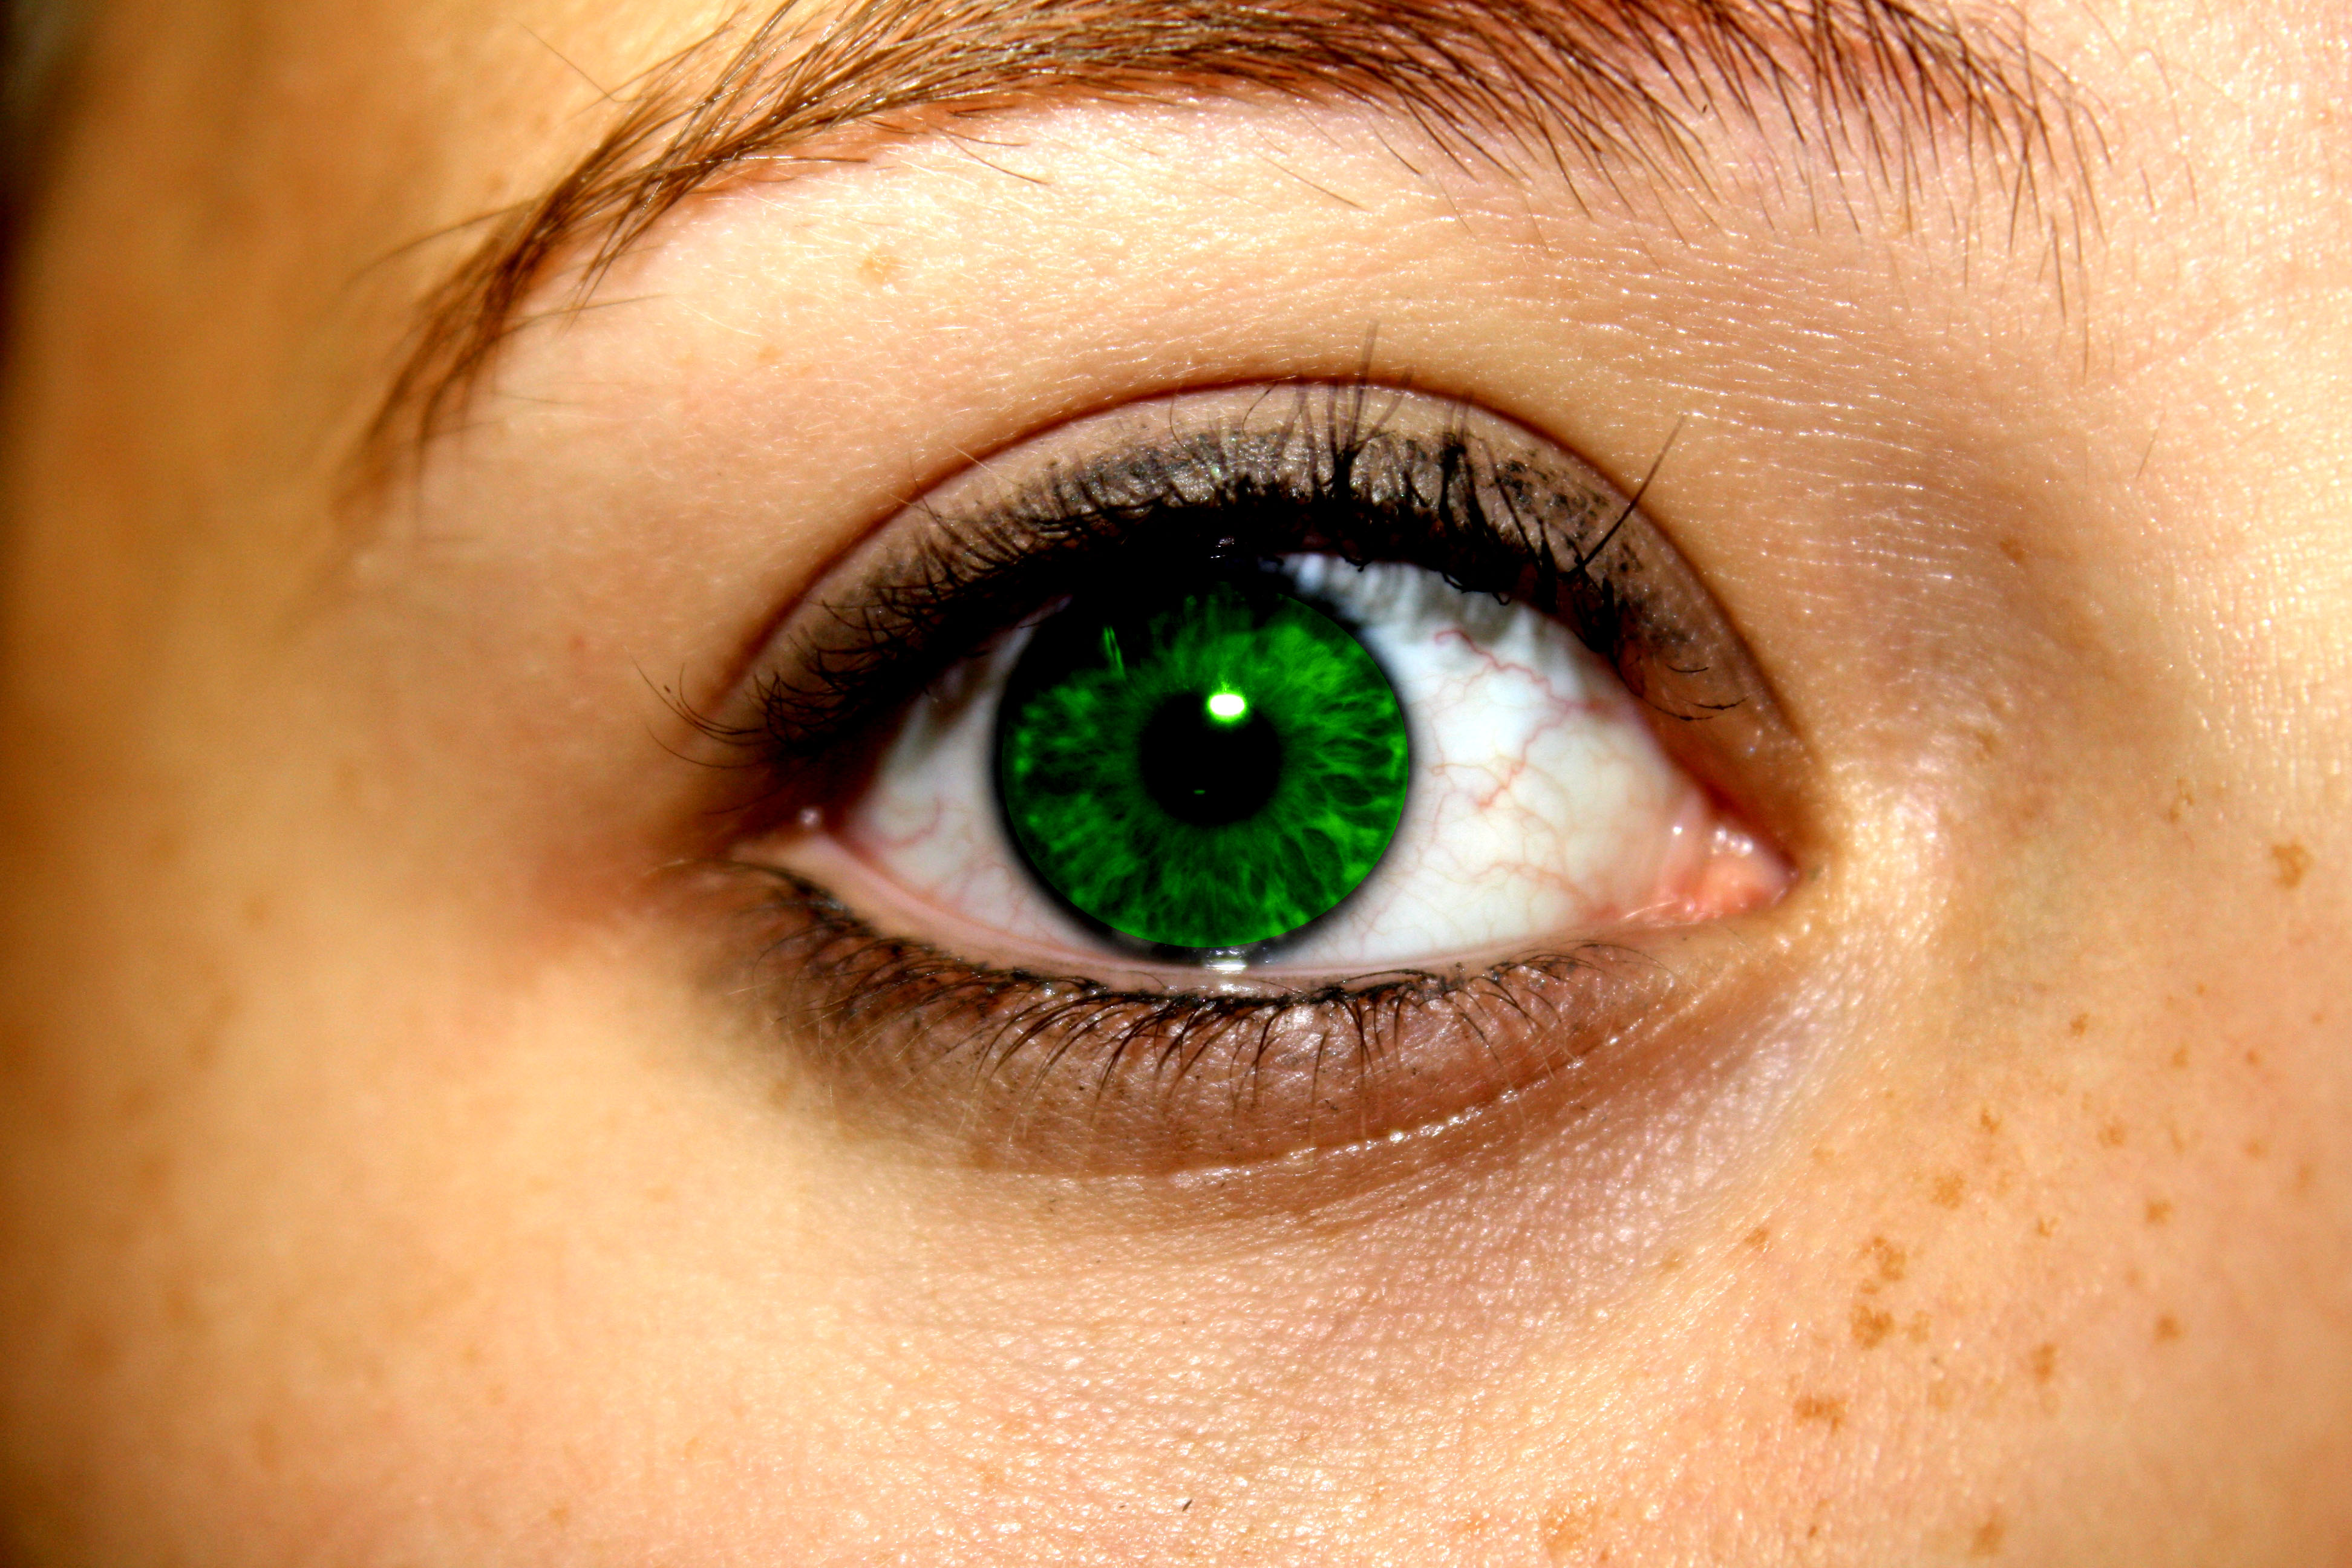 How To Change Your Eye Color To Light Brown Naturally HD Wallpapers Download Free Images Wallpaper [wallpaper896.blogspot.com]